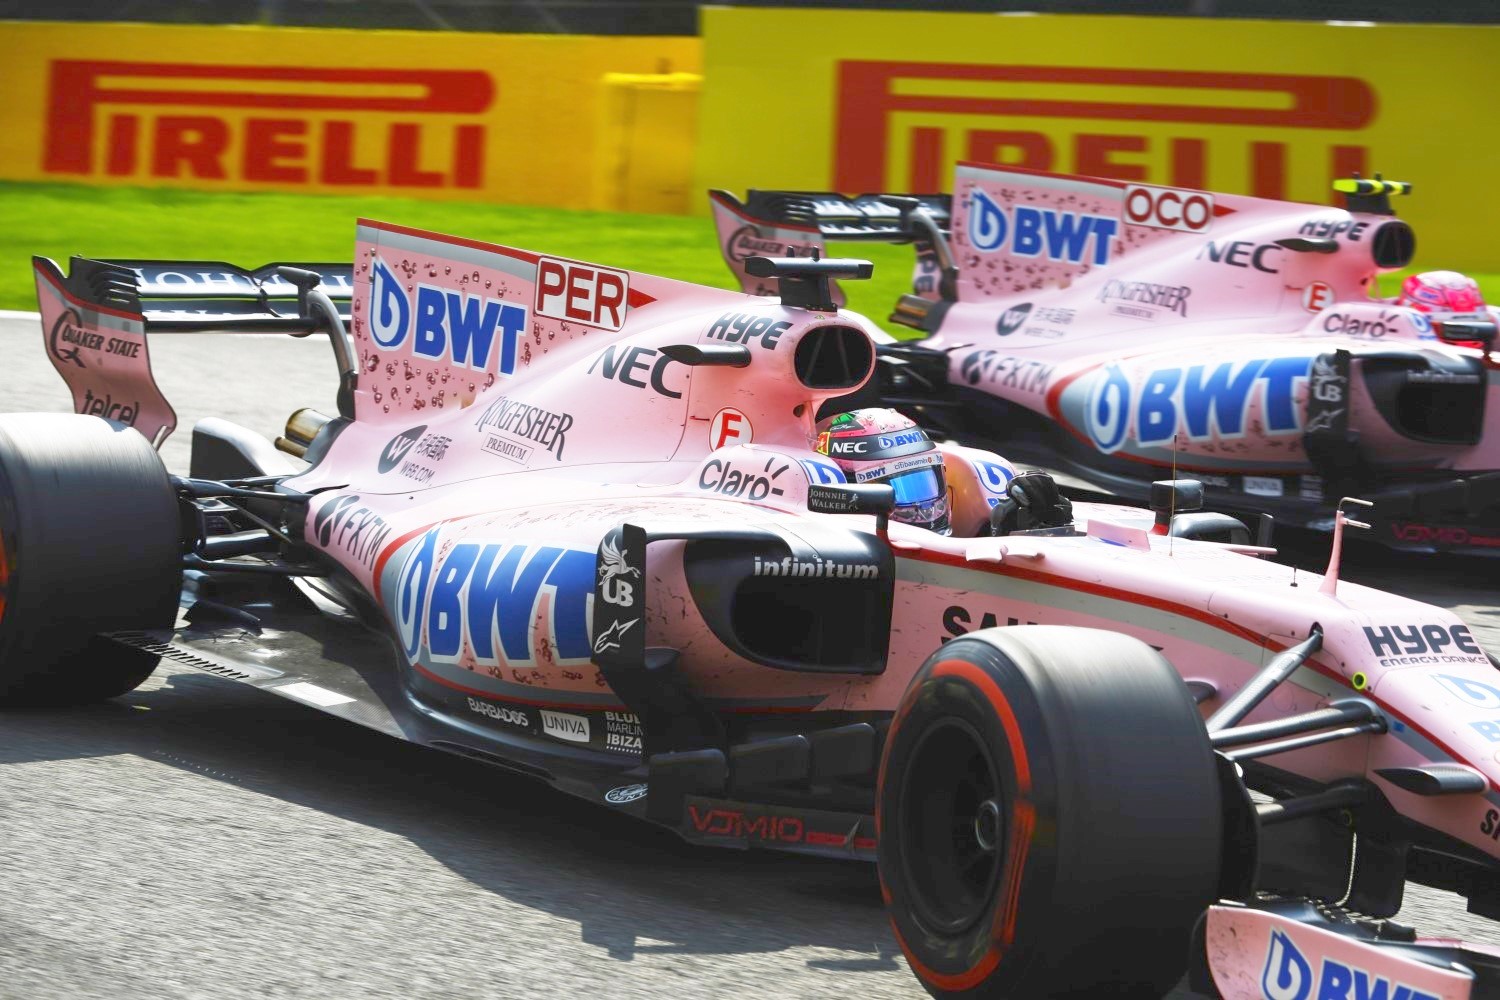 Ocon and especially Perez bring money to prop up the team. Can they afford to sit them